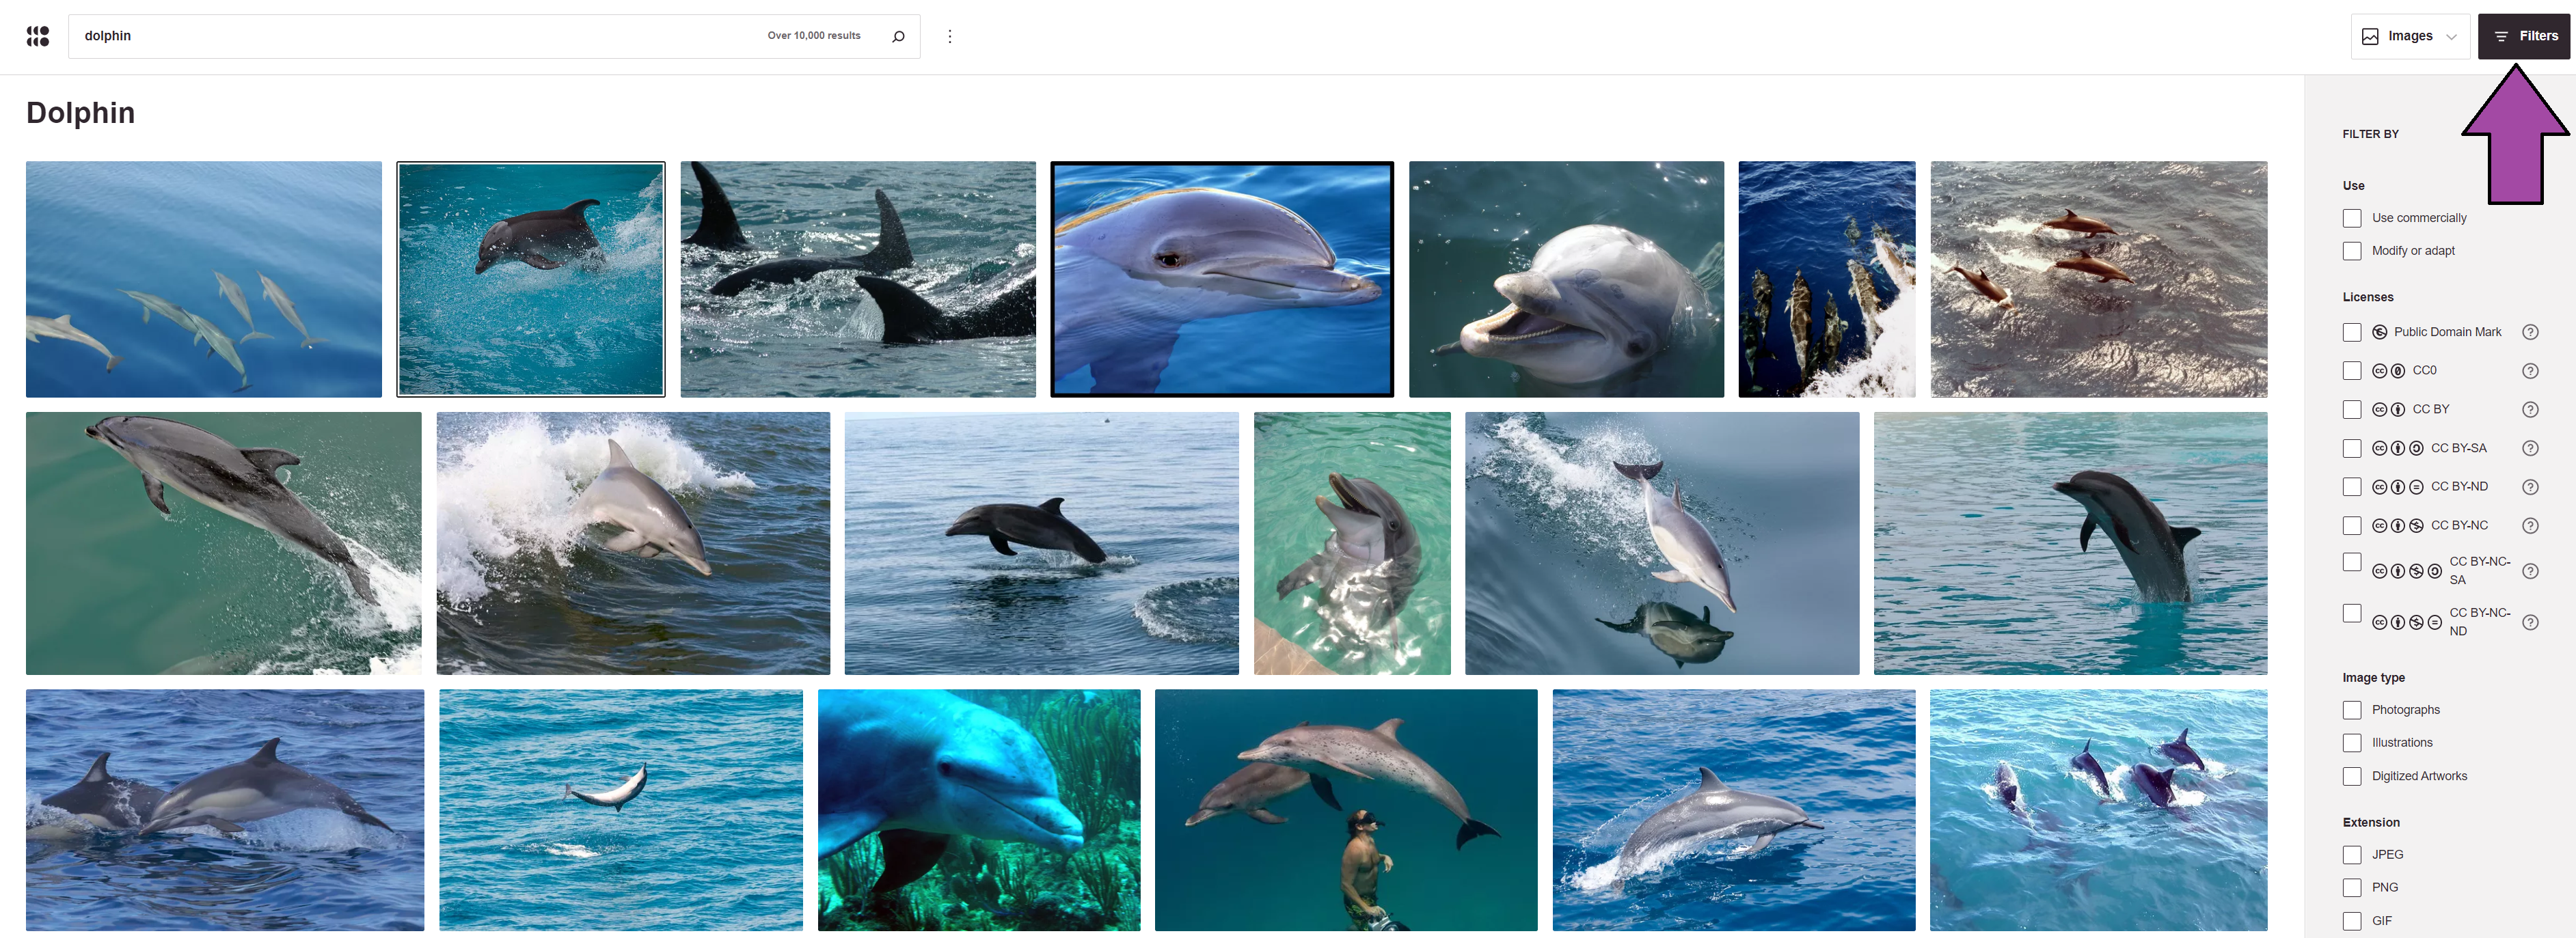 A search page with many dolphin images. Includes "filters" for advanced sorting.